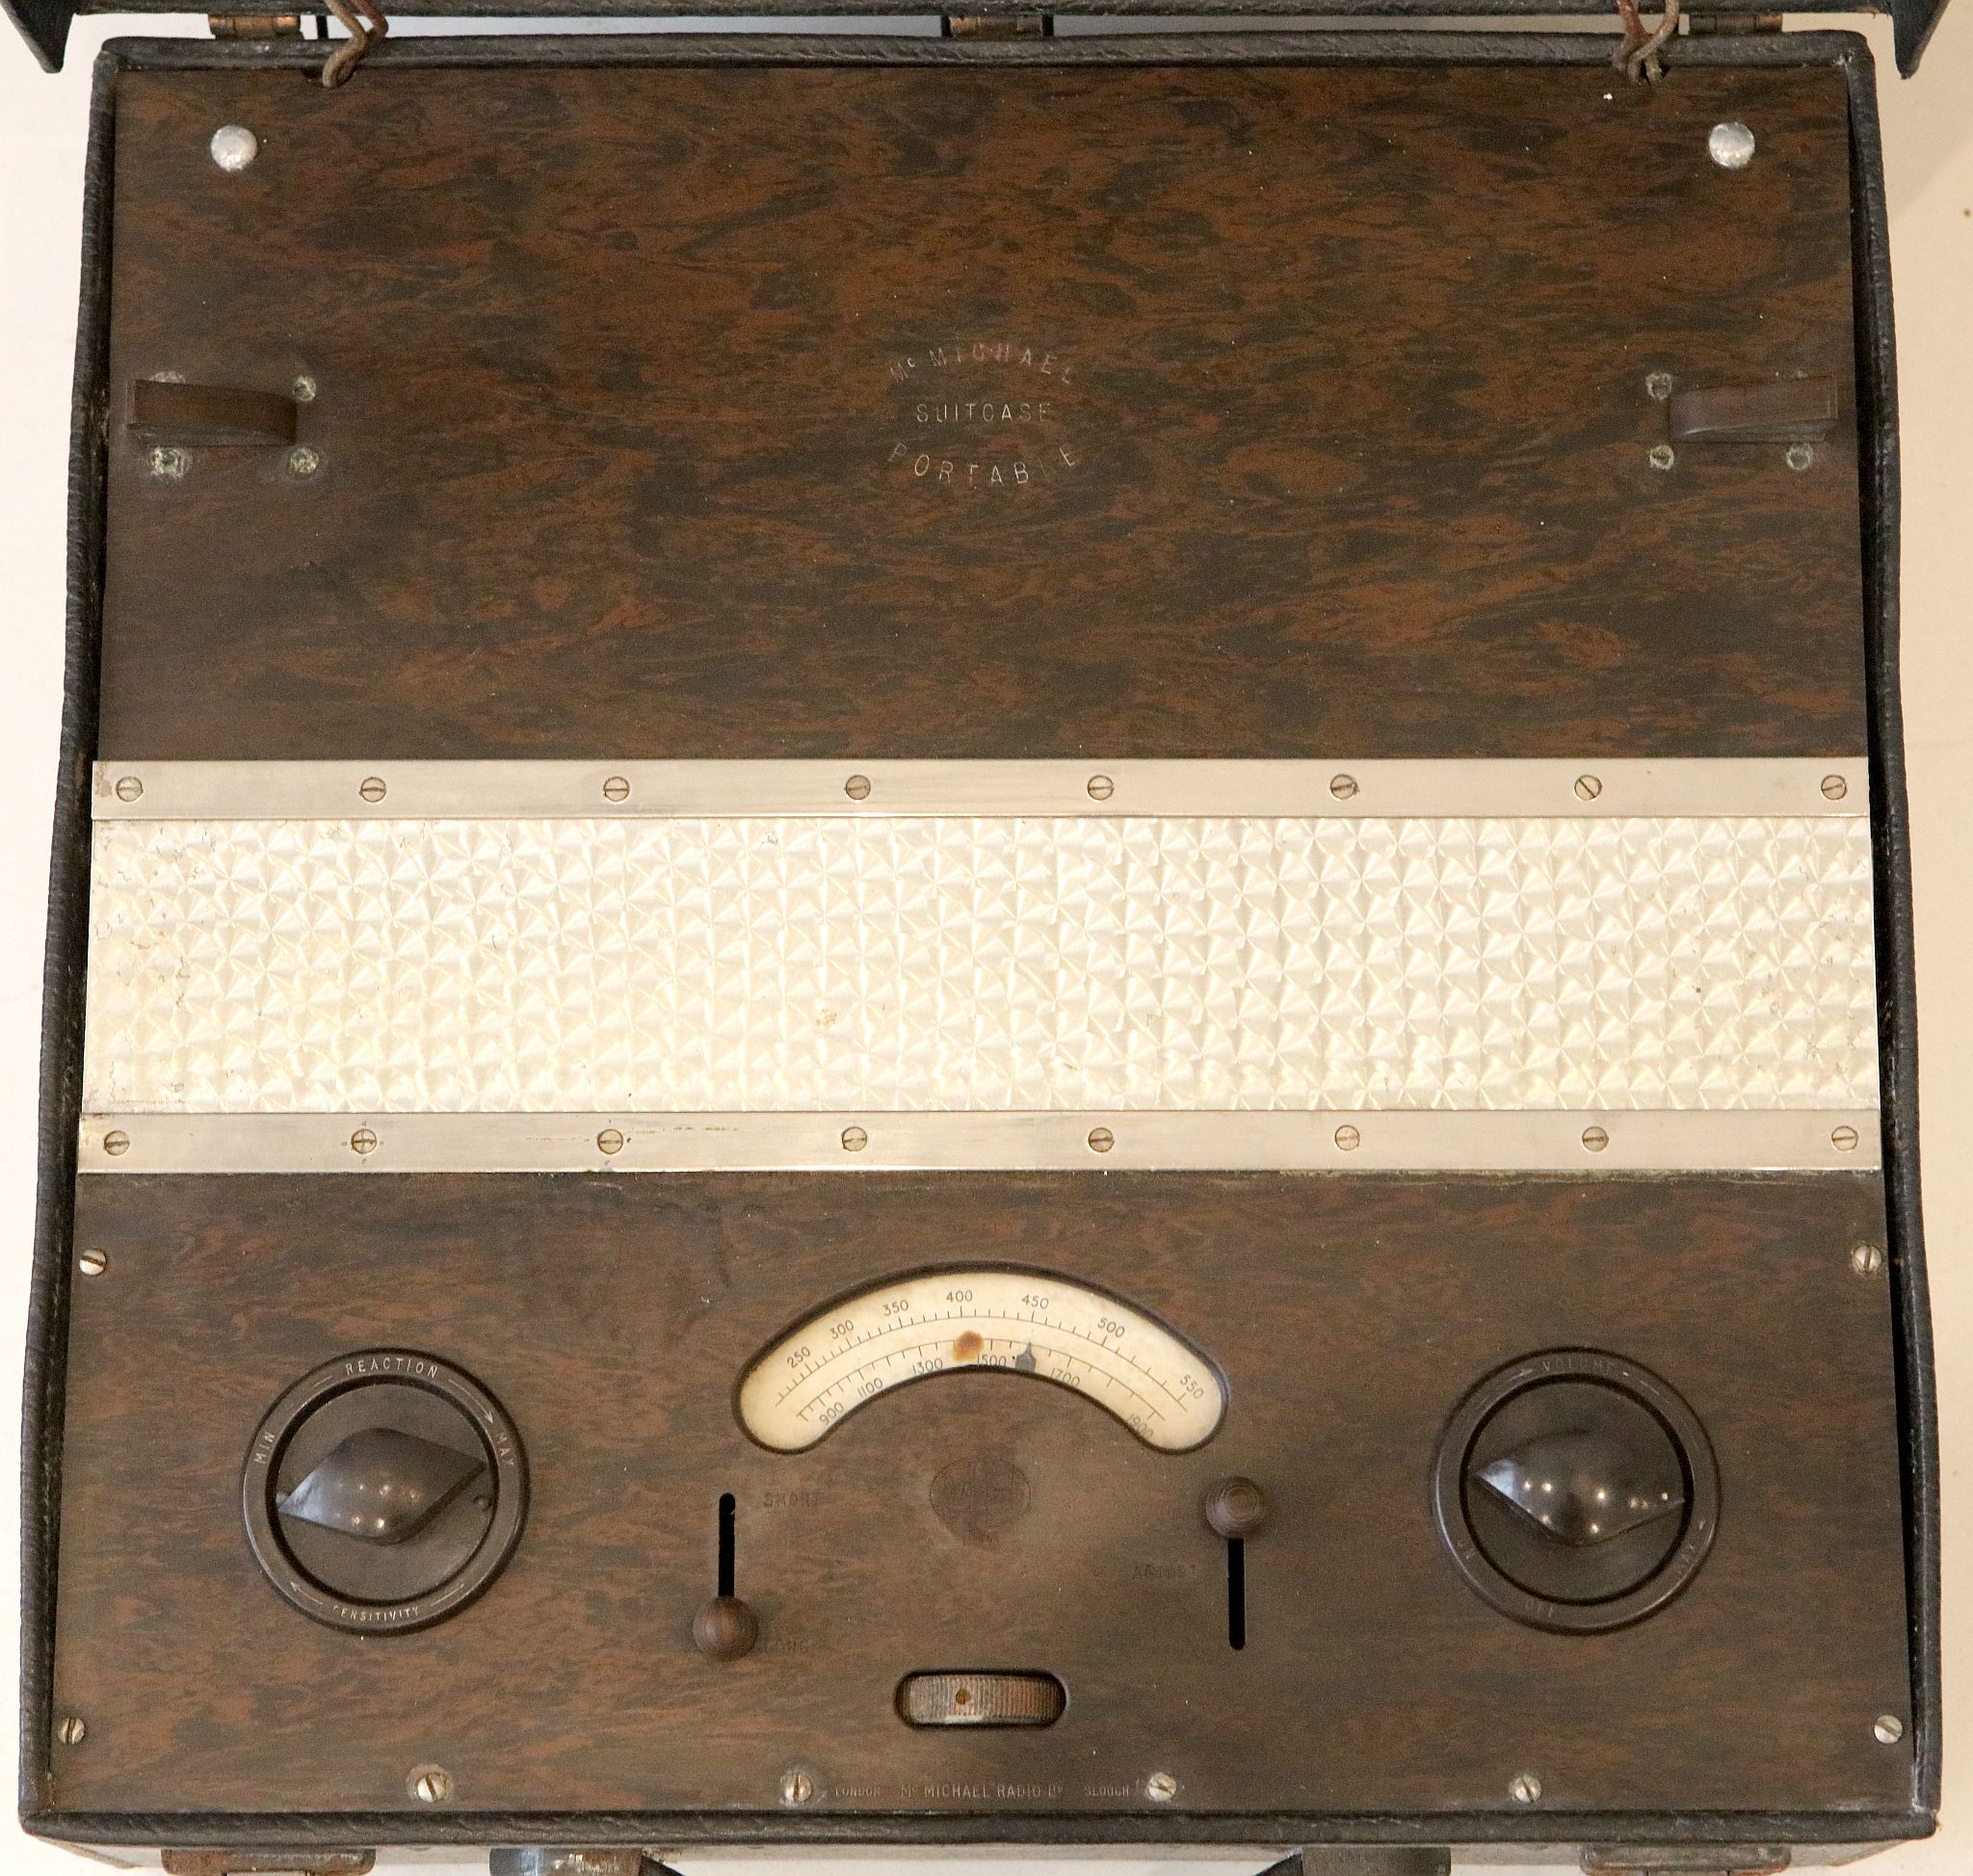 A vintage McMichael suitcase / portable radio with speaker in lid, black finish case, 39 x 39 x 22cm - Image 2 of 3